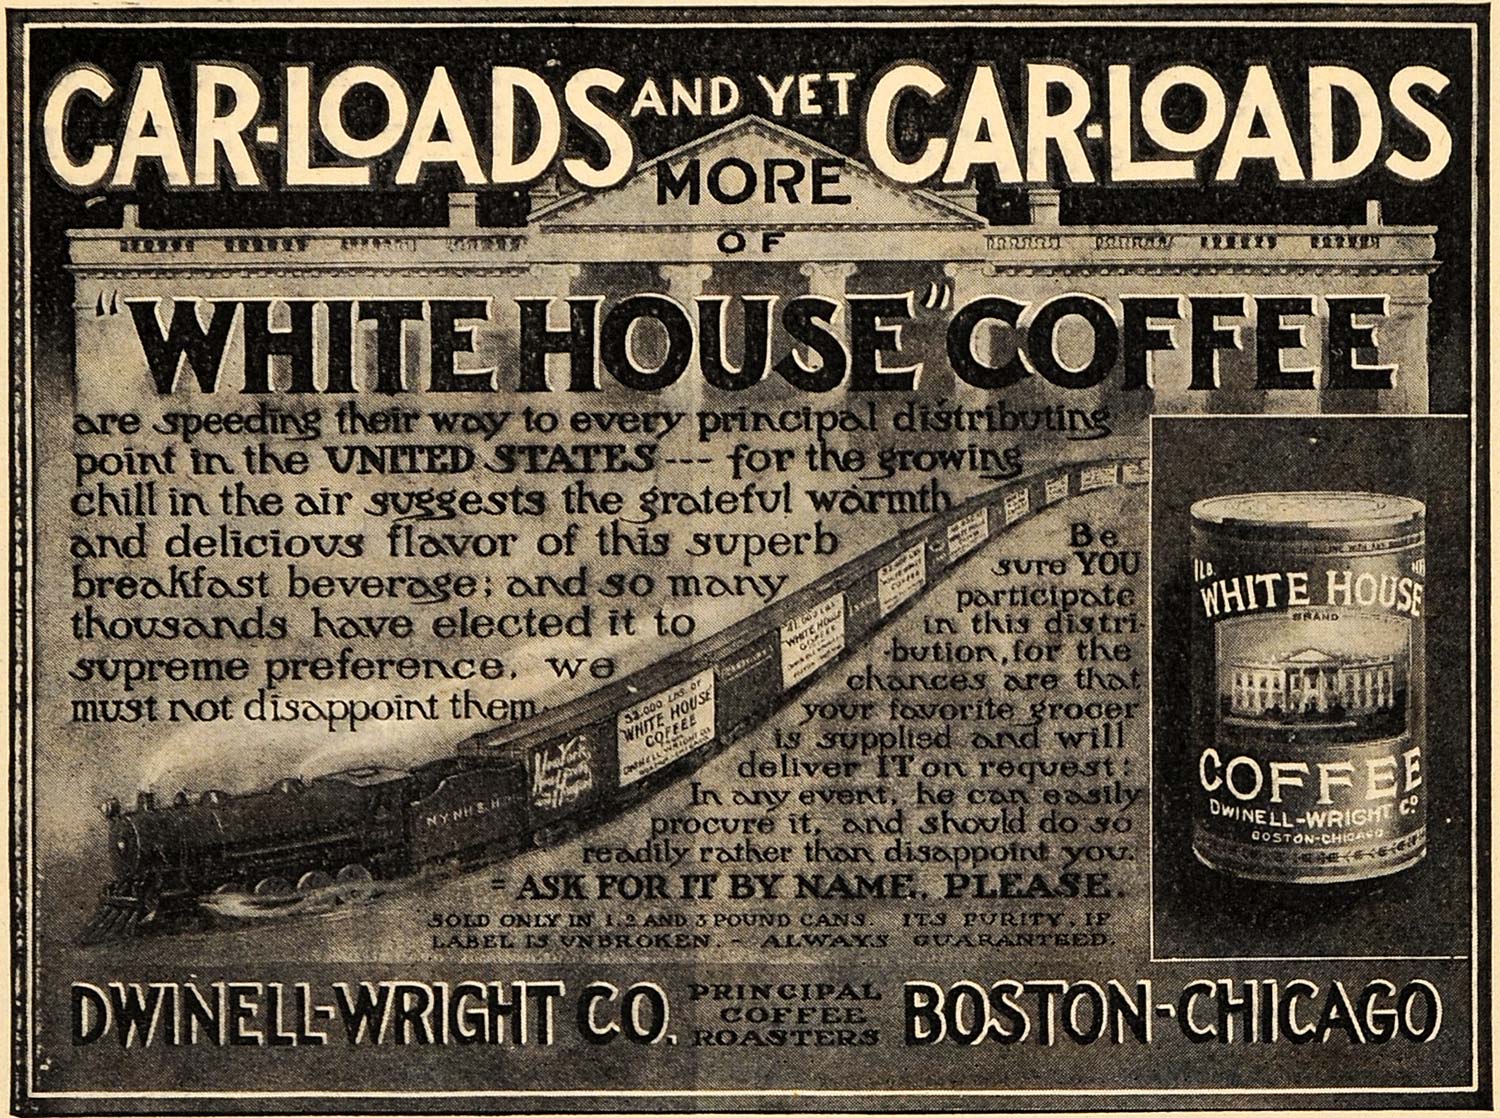 1909 Ad Dwinell-Wright White House Coffee Carloads More - ORIGINAL GH2